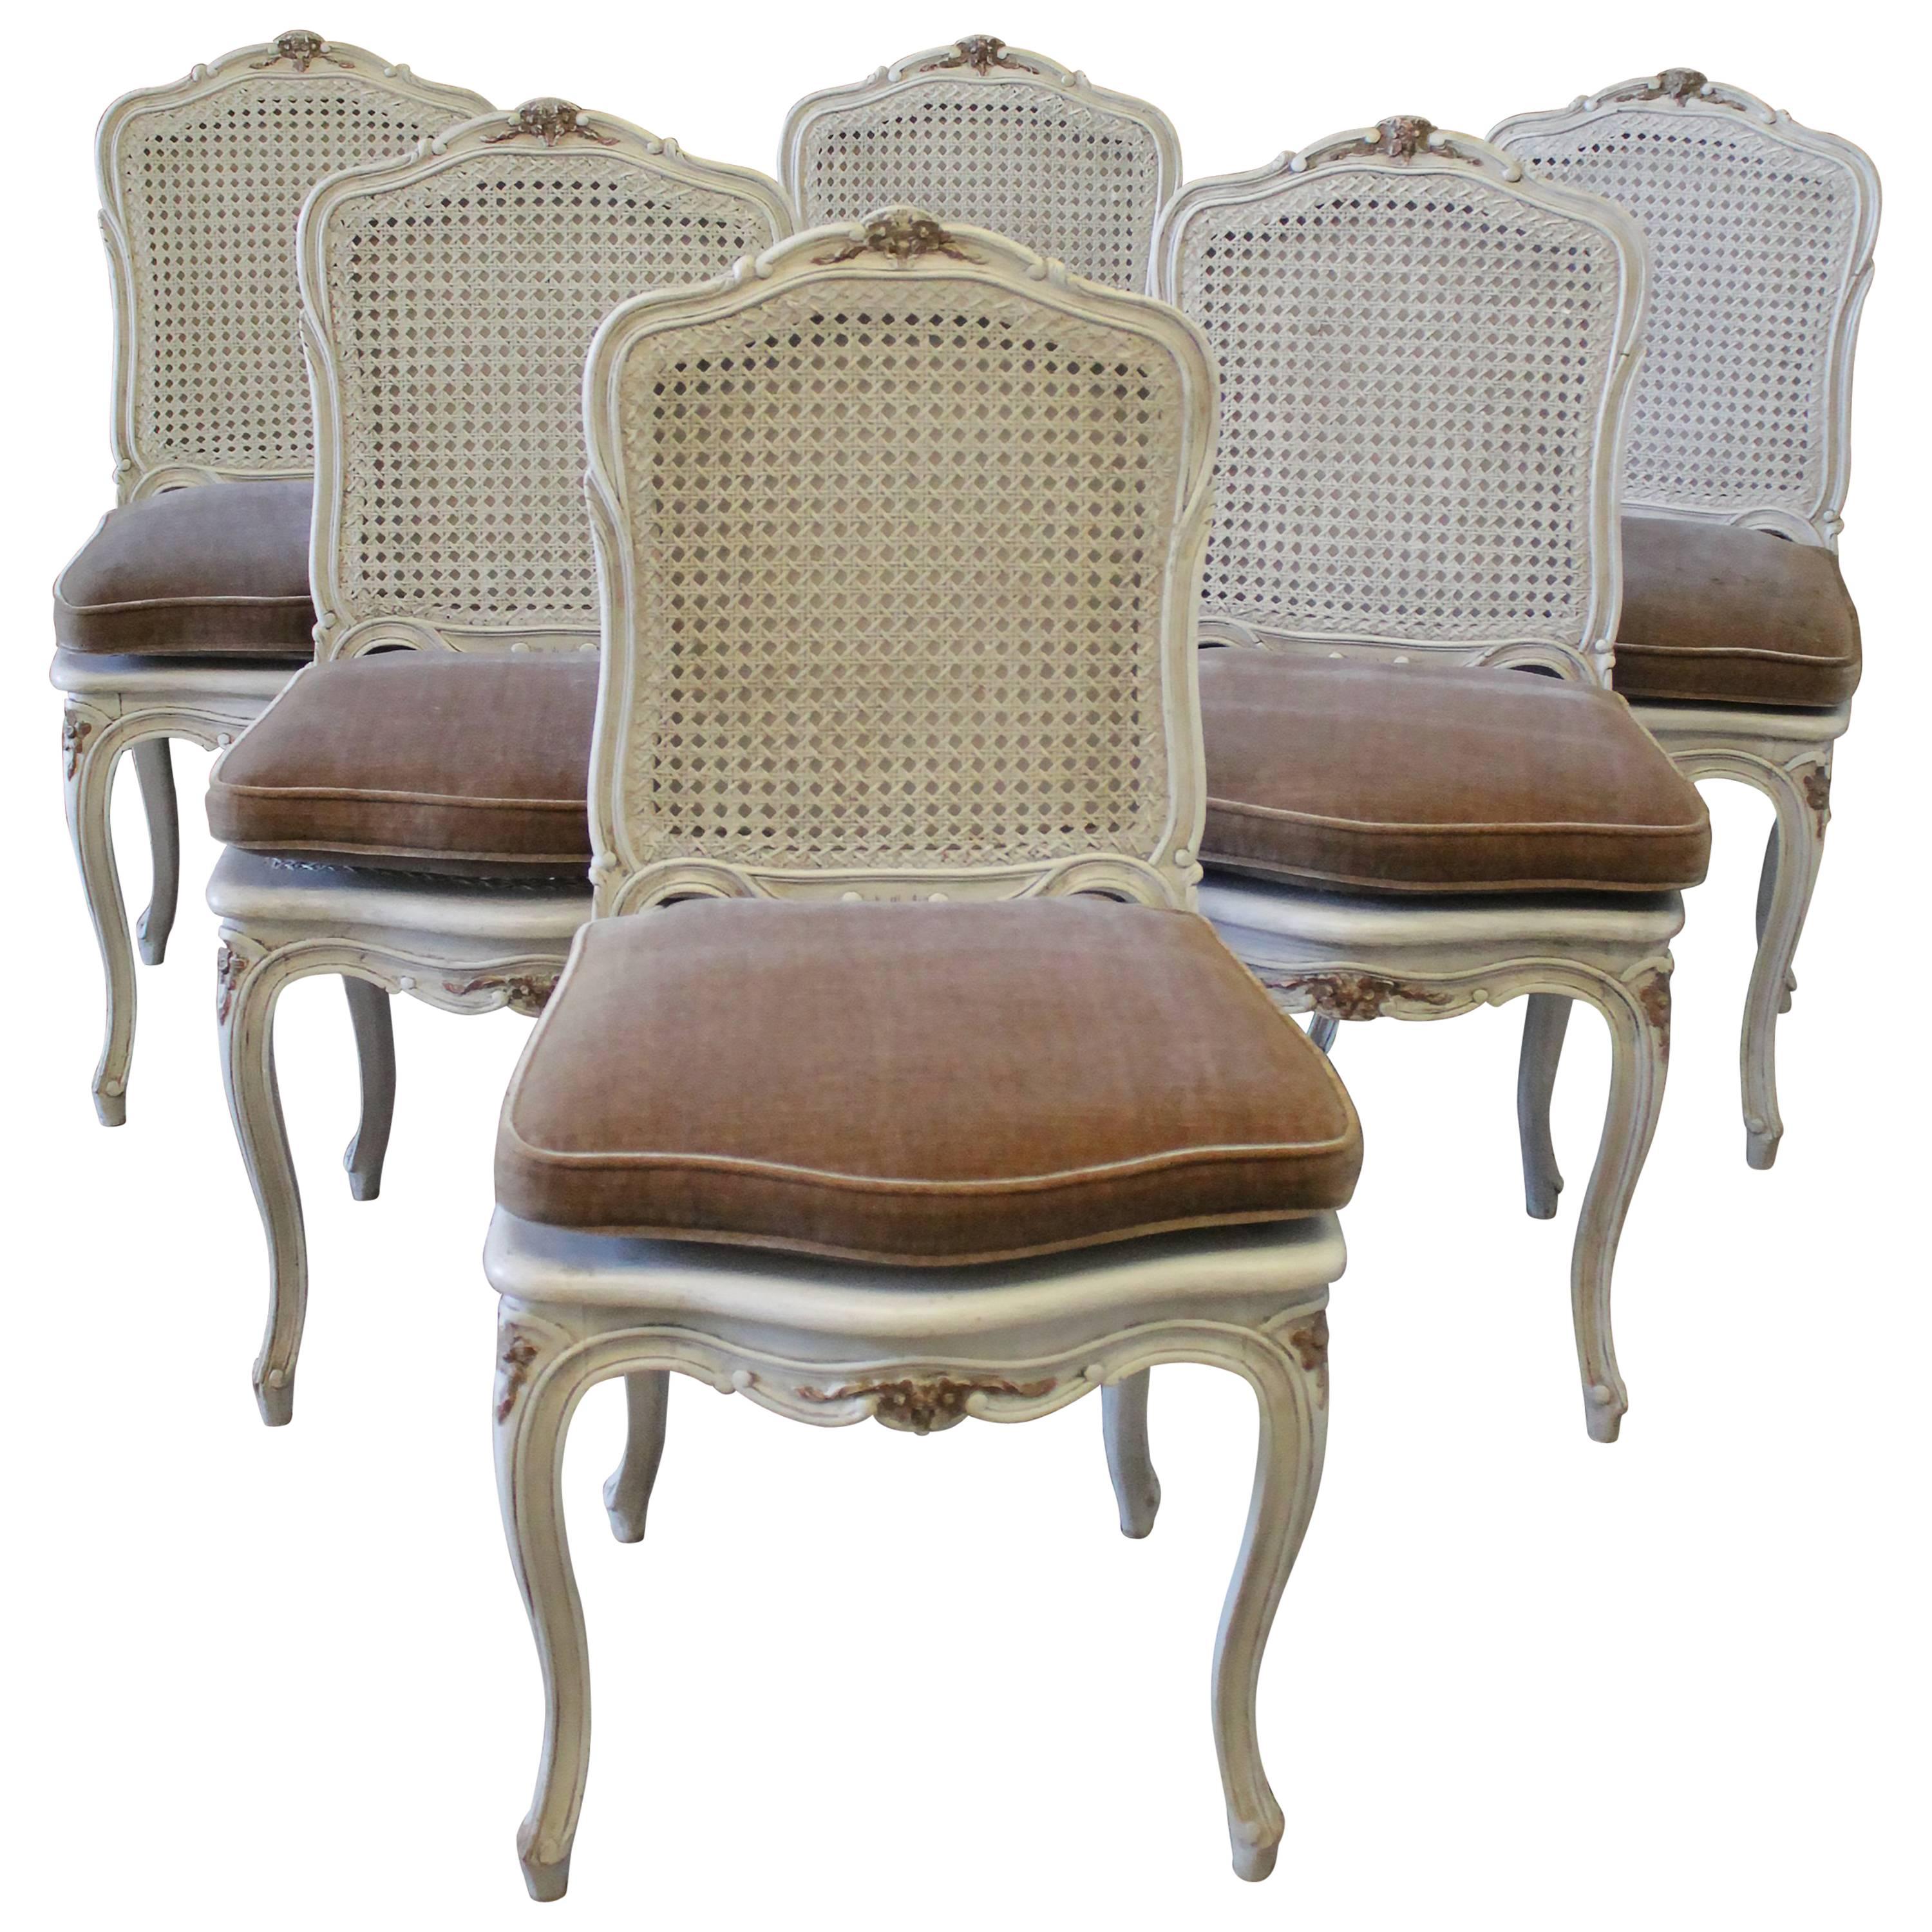 Six Early 20th Century Painted French Louis XV Style Cane Back Dining Chairs